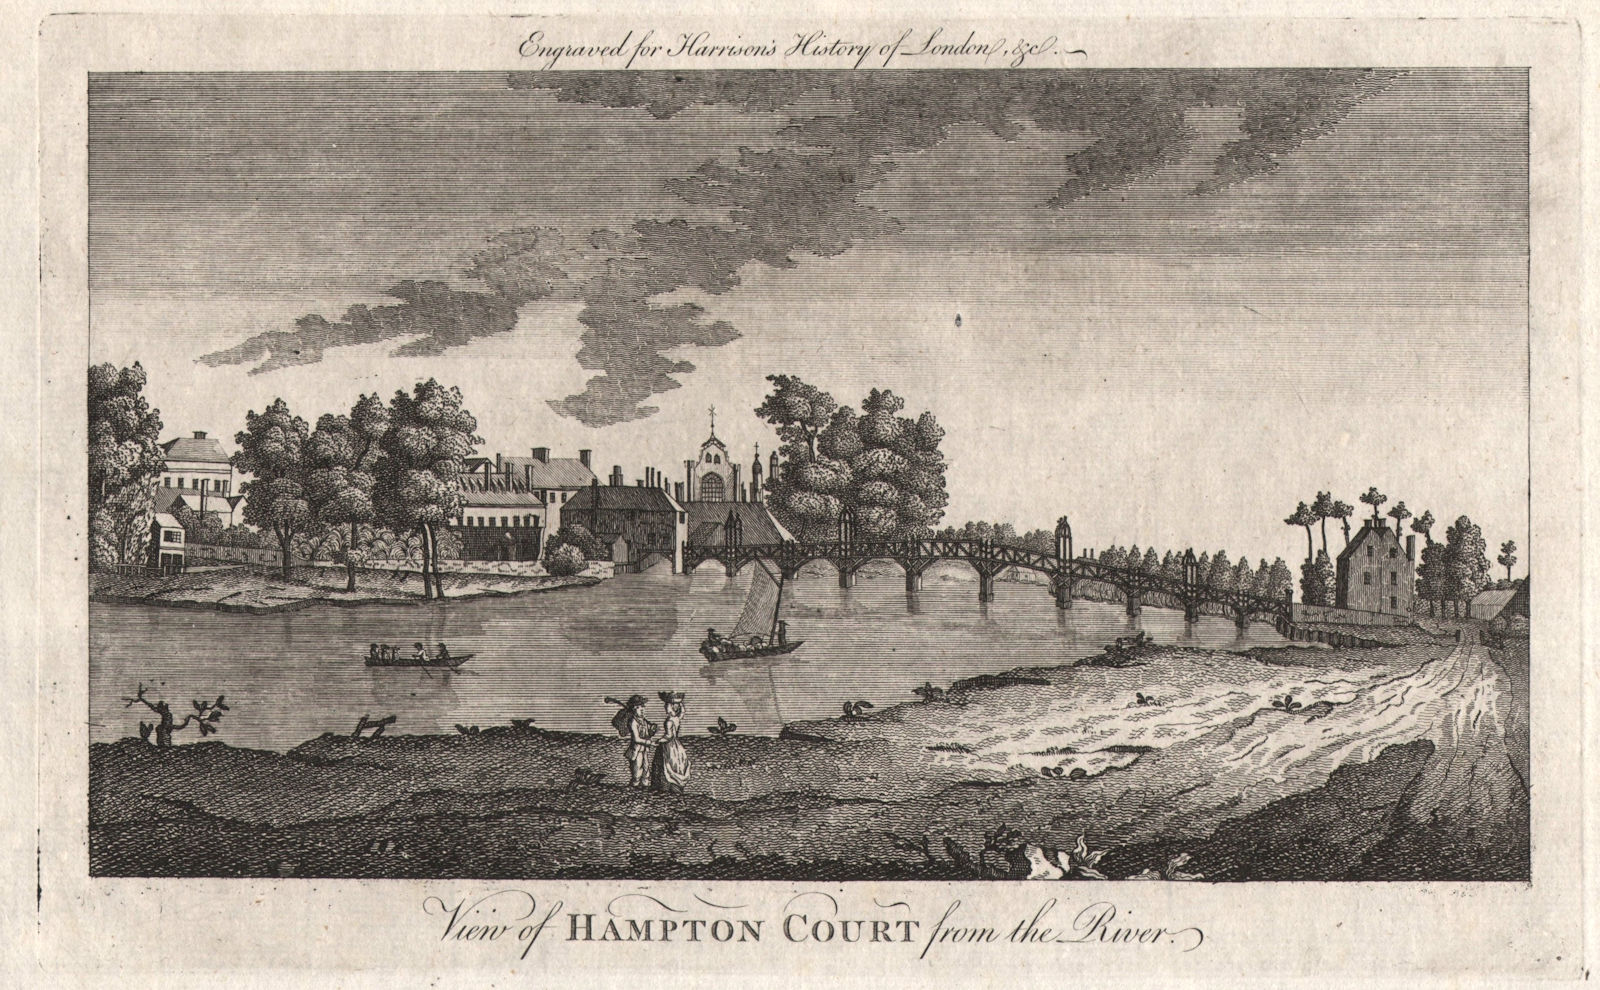 "View of Hampton Court from the river" /East Molesey, London. HARRISON 1776